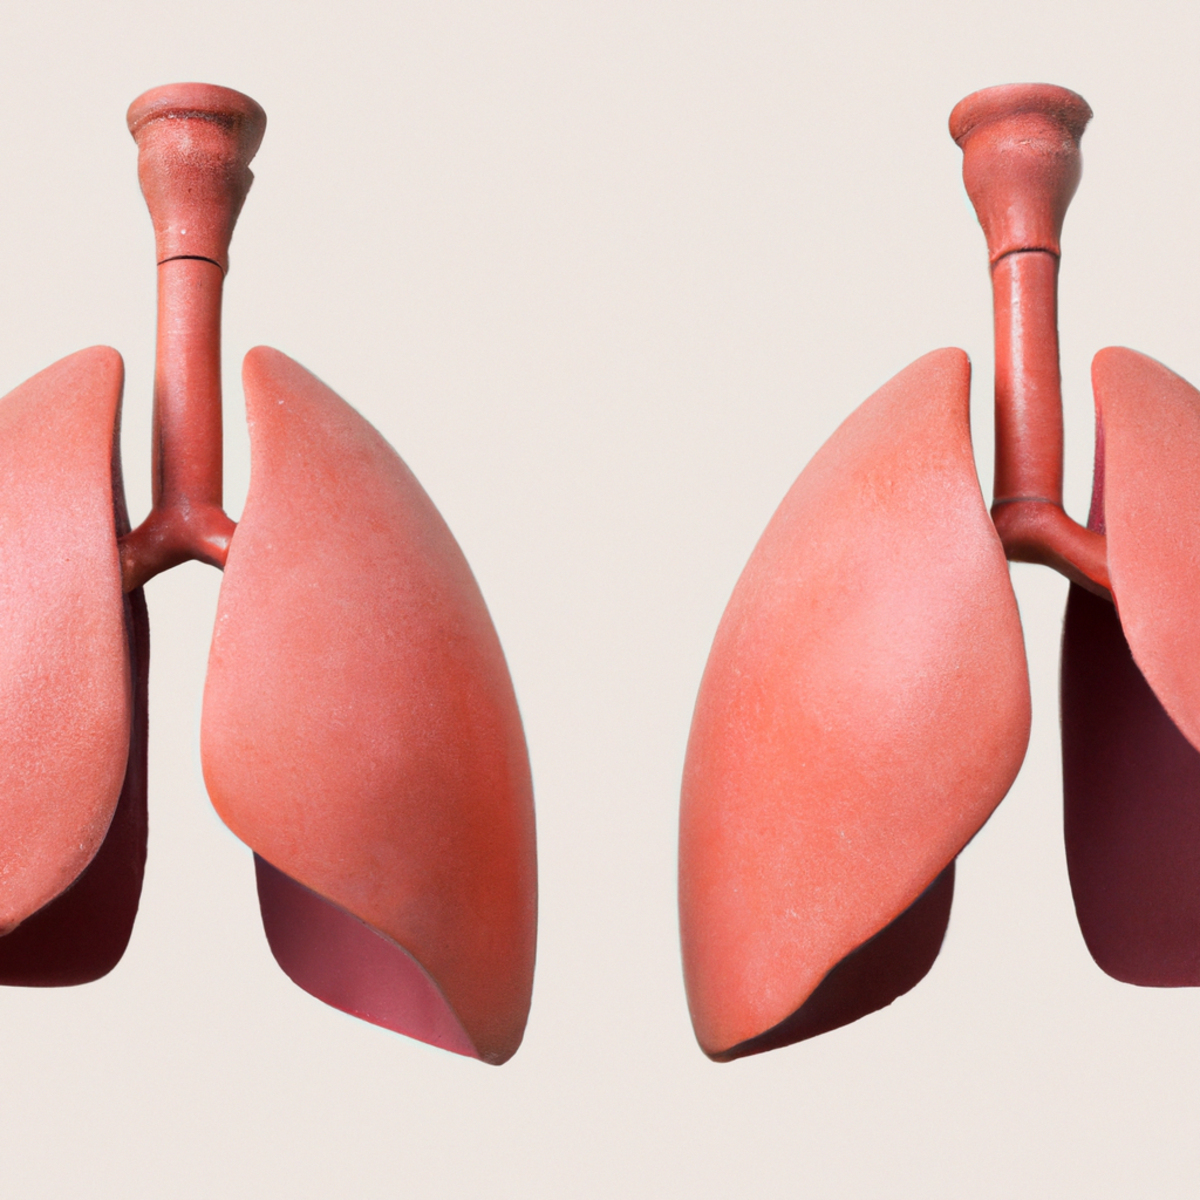 3D models of healthy pink lungs and Desquamative Interstitial Pneumonia (DIP)affected gray lungs.